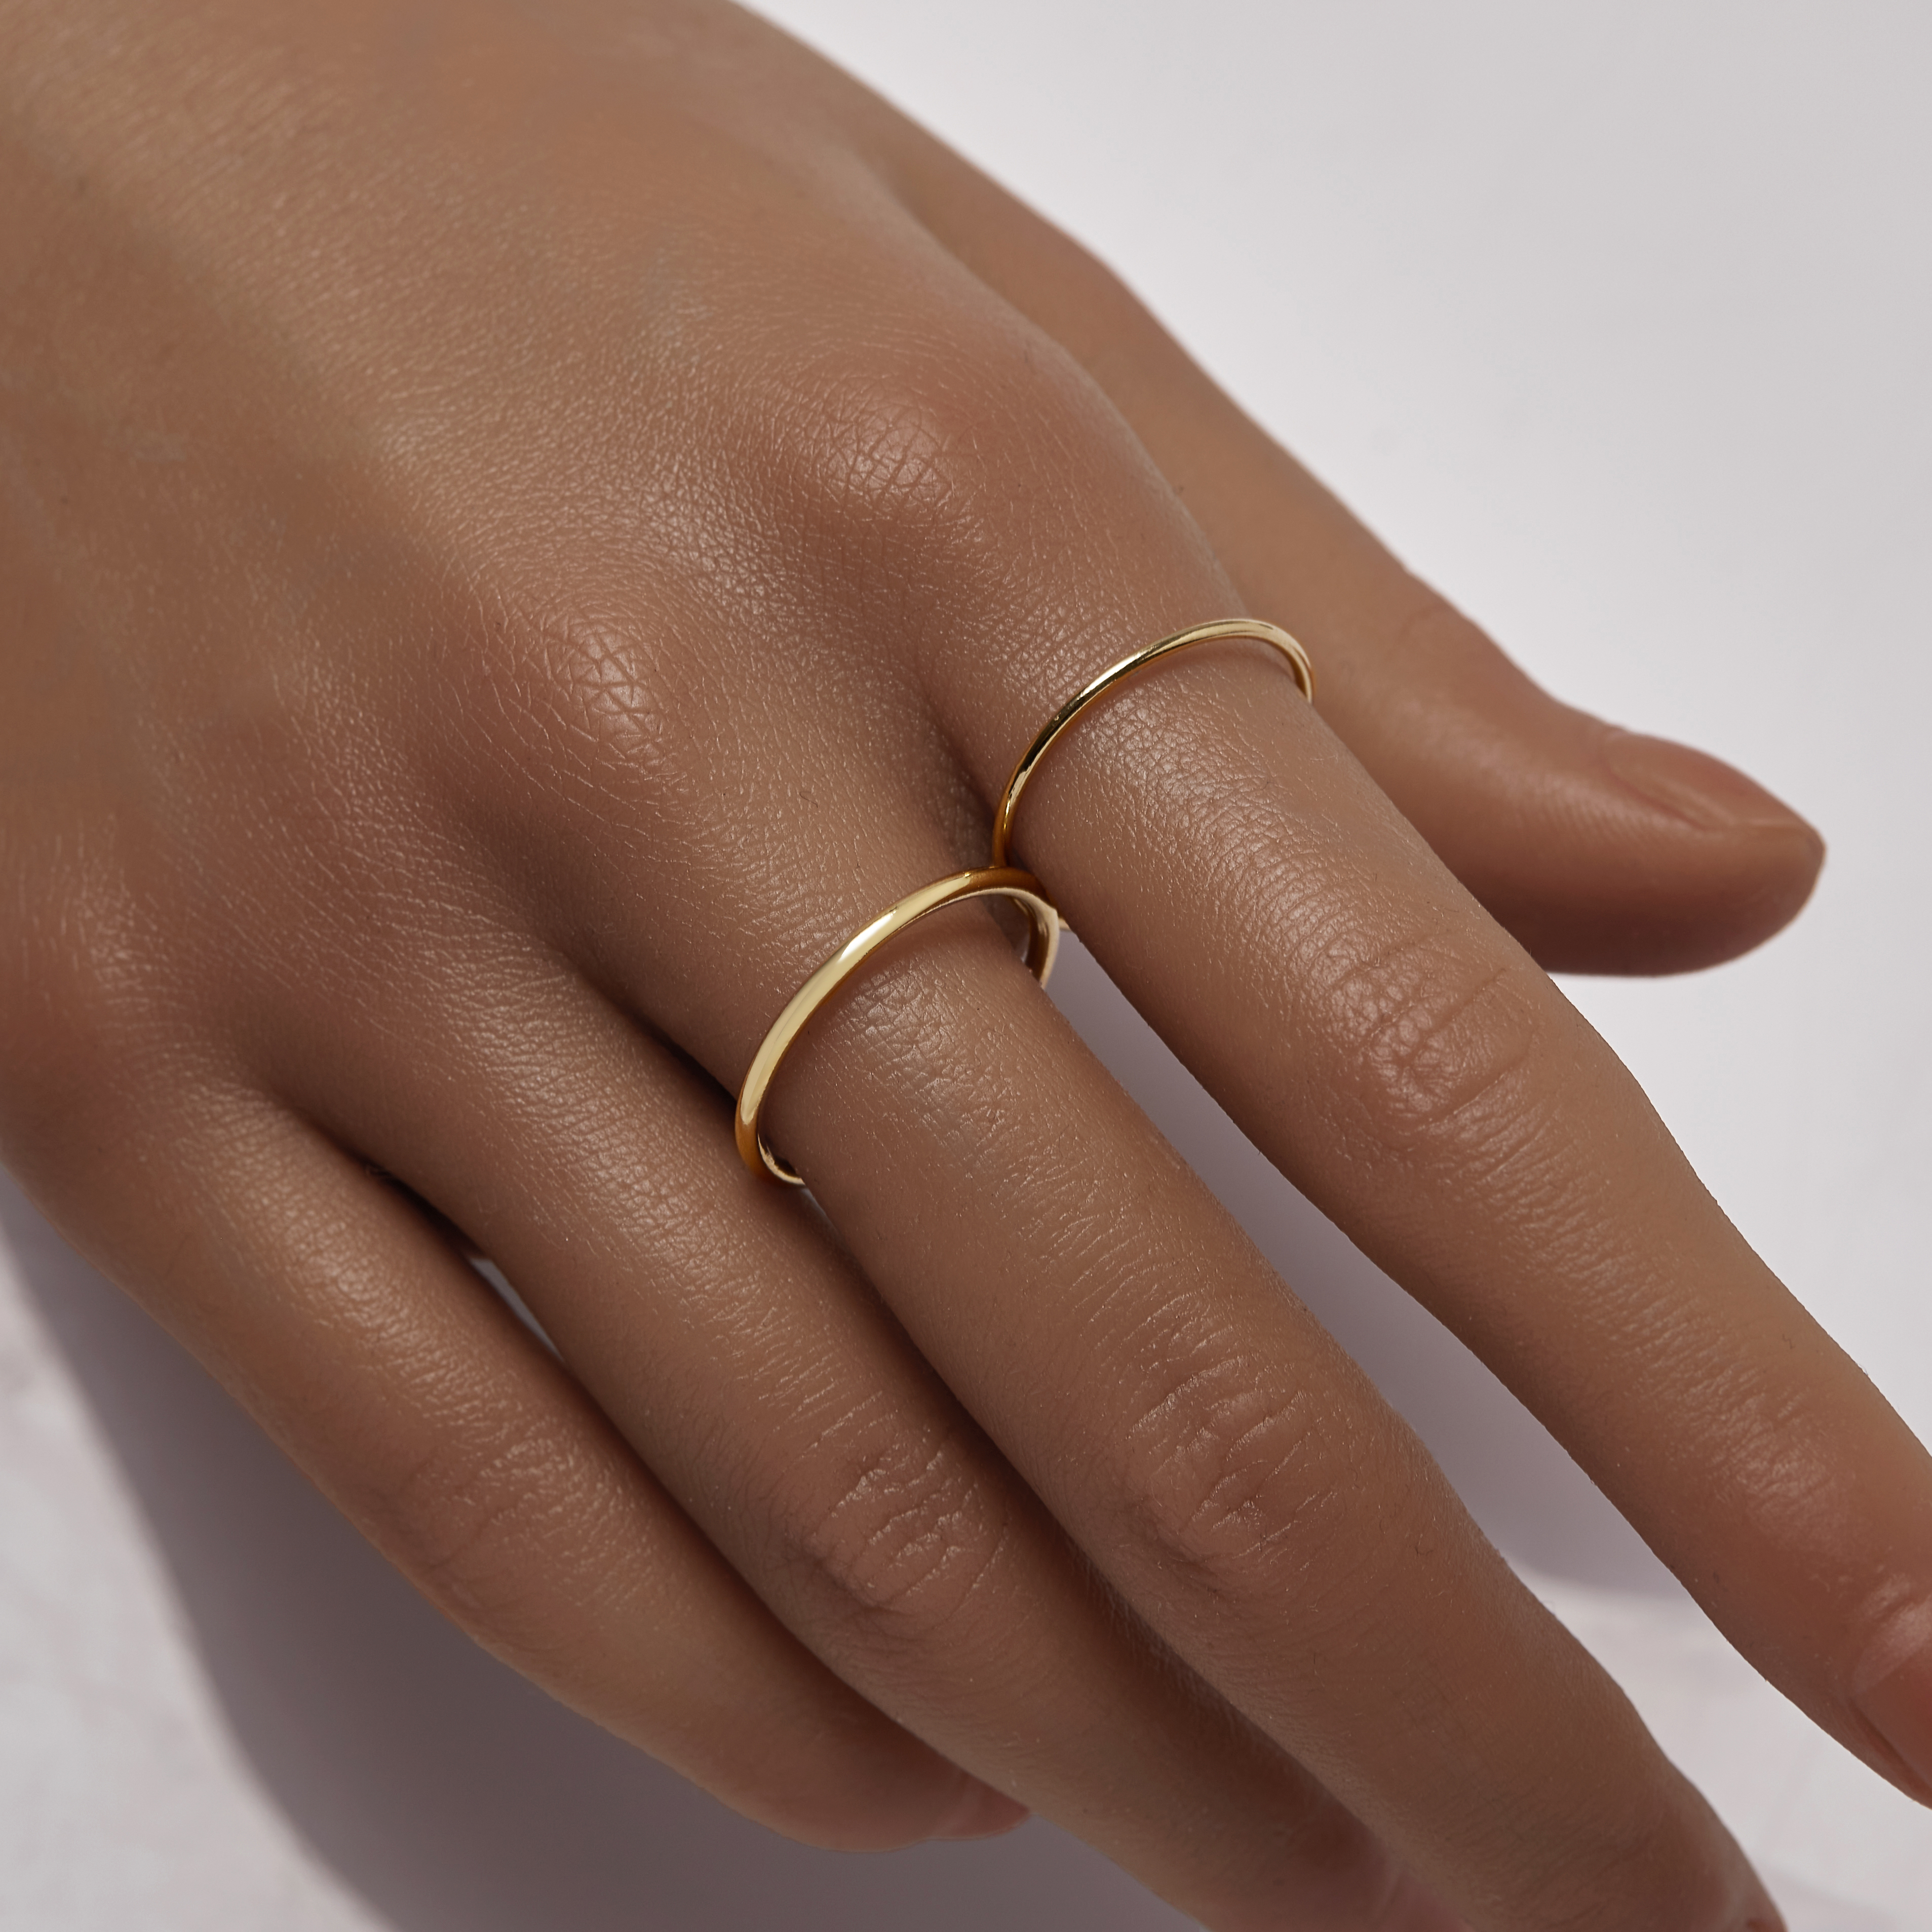 1PCS 1MM Wire Simple Thin 14K Gold Filled Ring,Minimalist Ring,Simple Gold Filled Ring,Stackable Ring,DIY Ring Supplies 1294749 - Click Image to Close